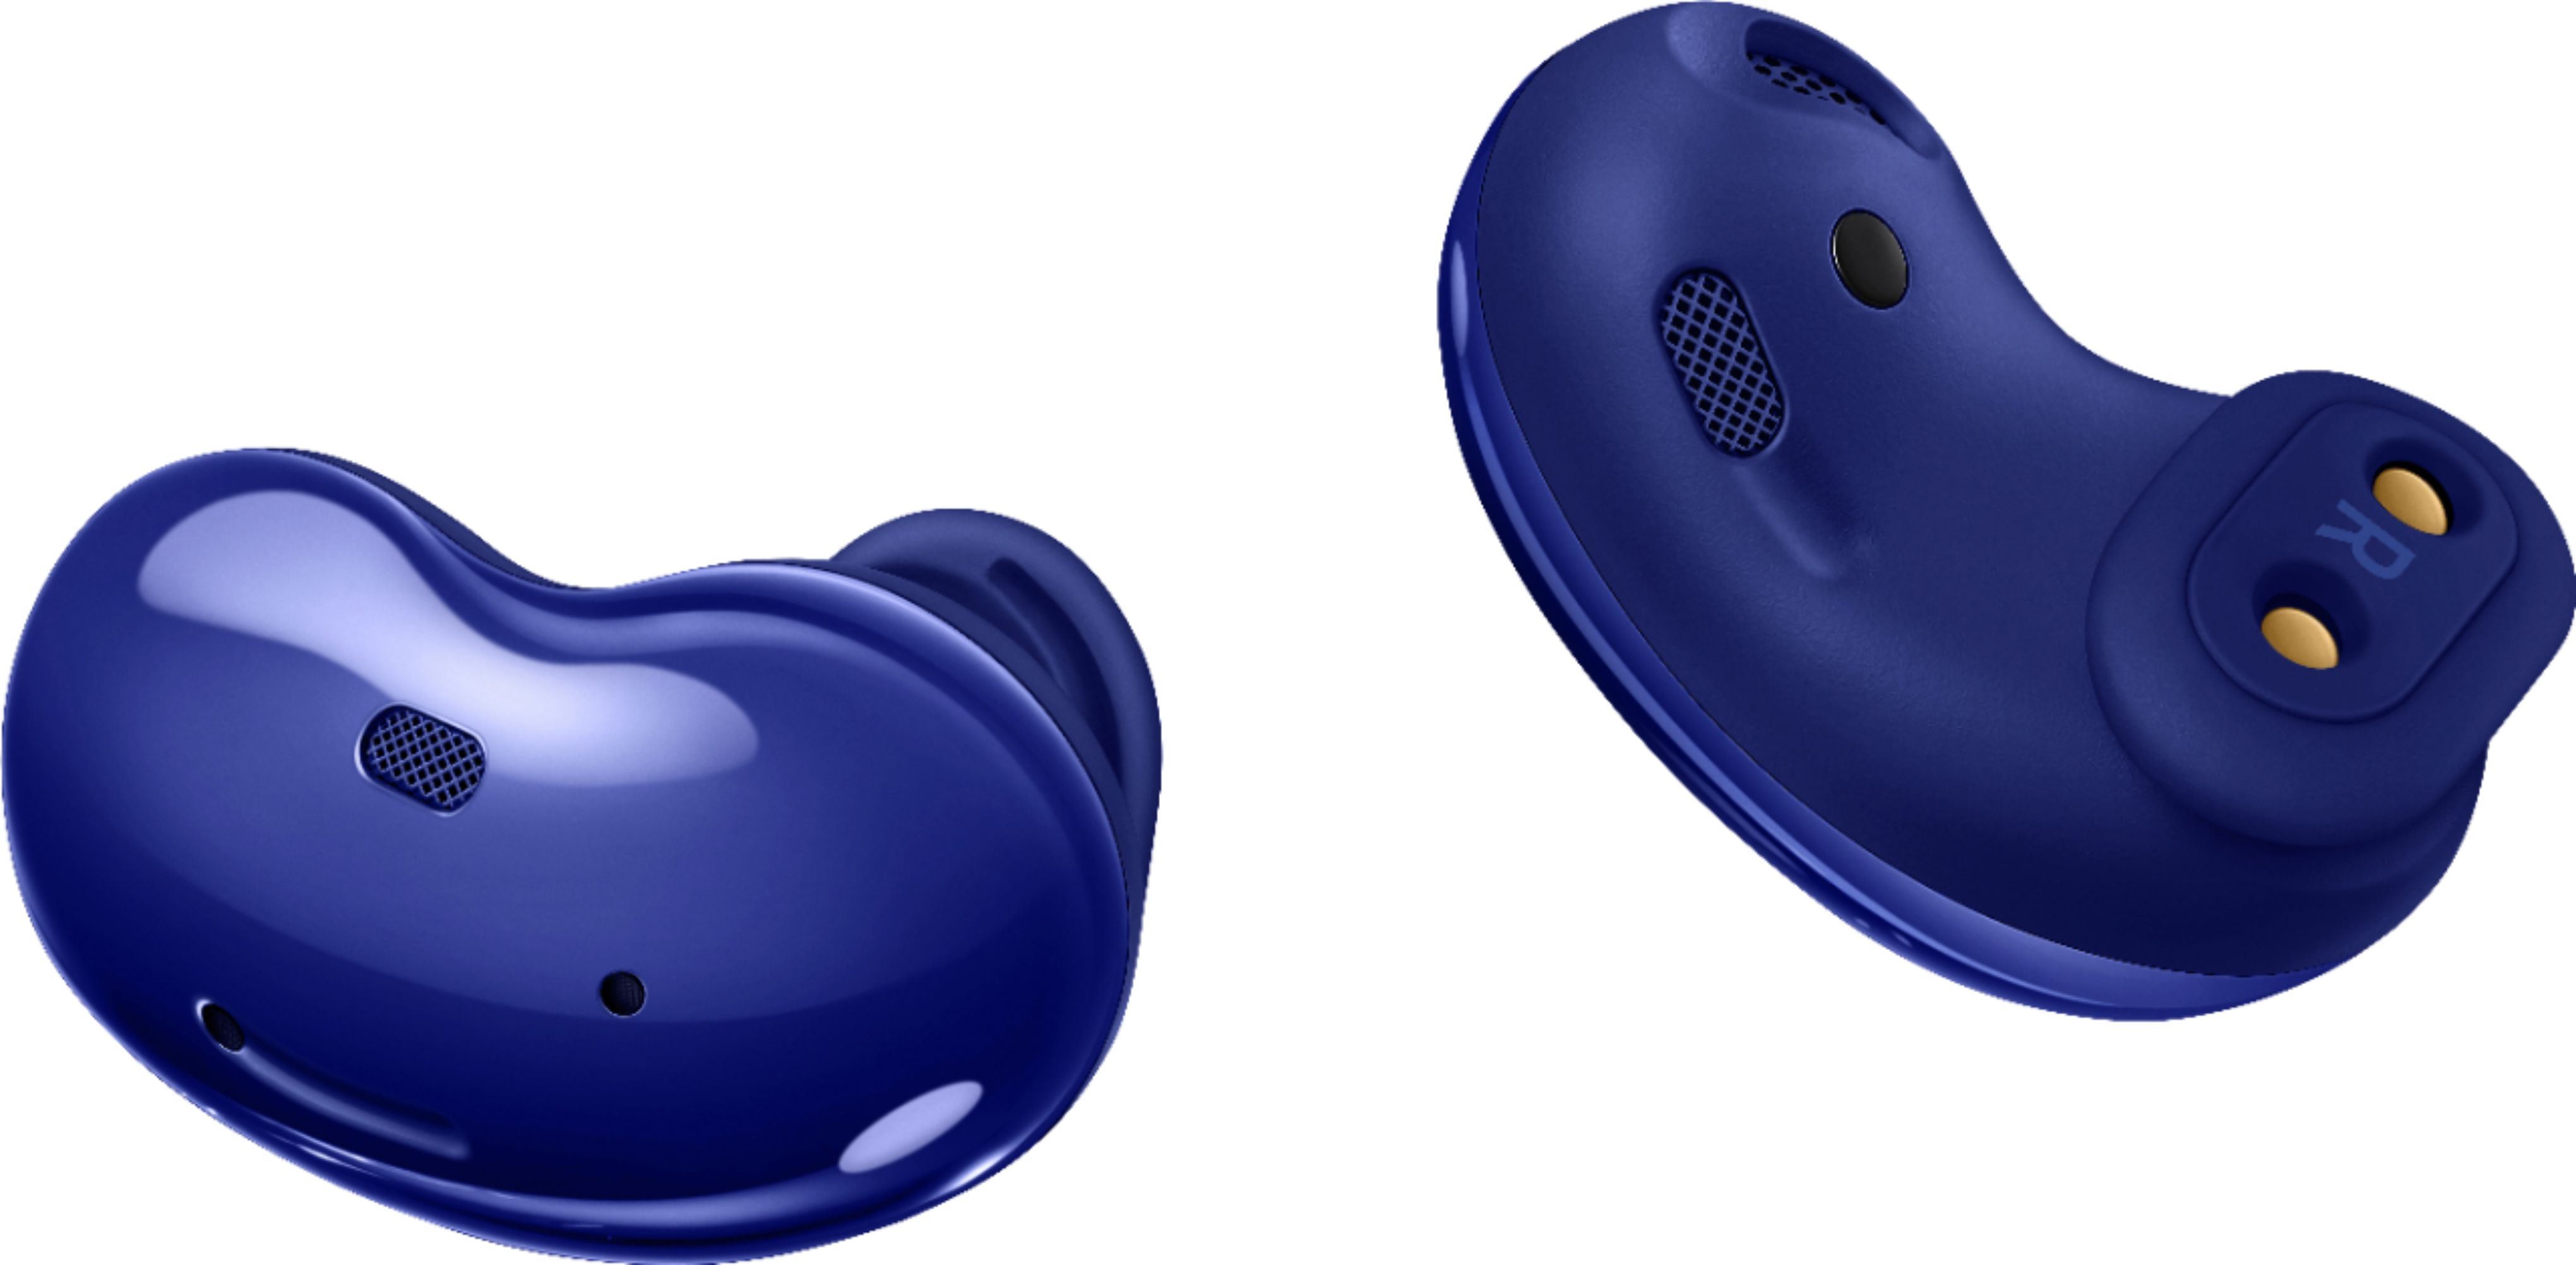 Samsung Galaxy Buds Live Wireless Earphones, 2 Year Extended